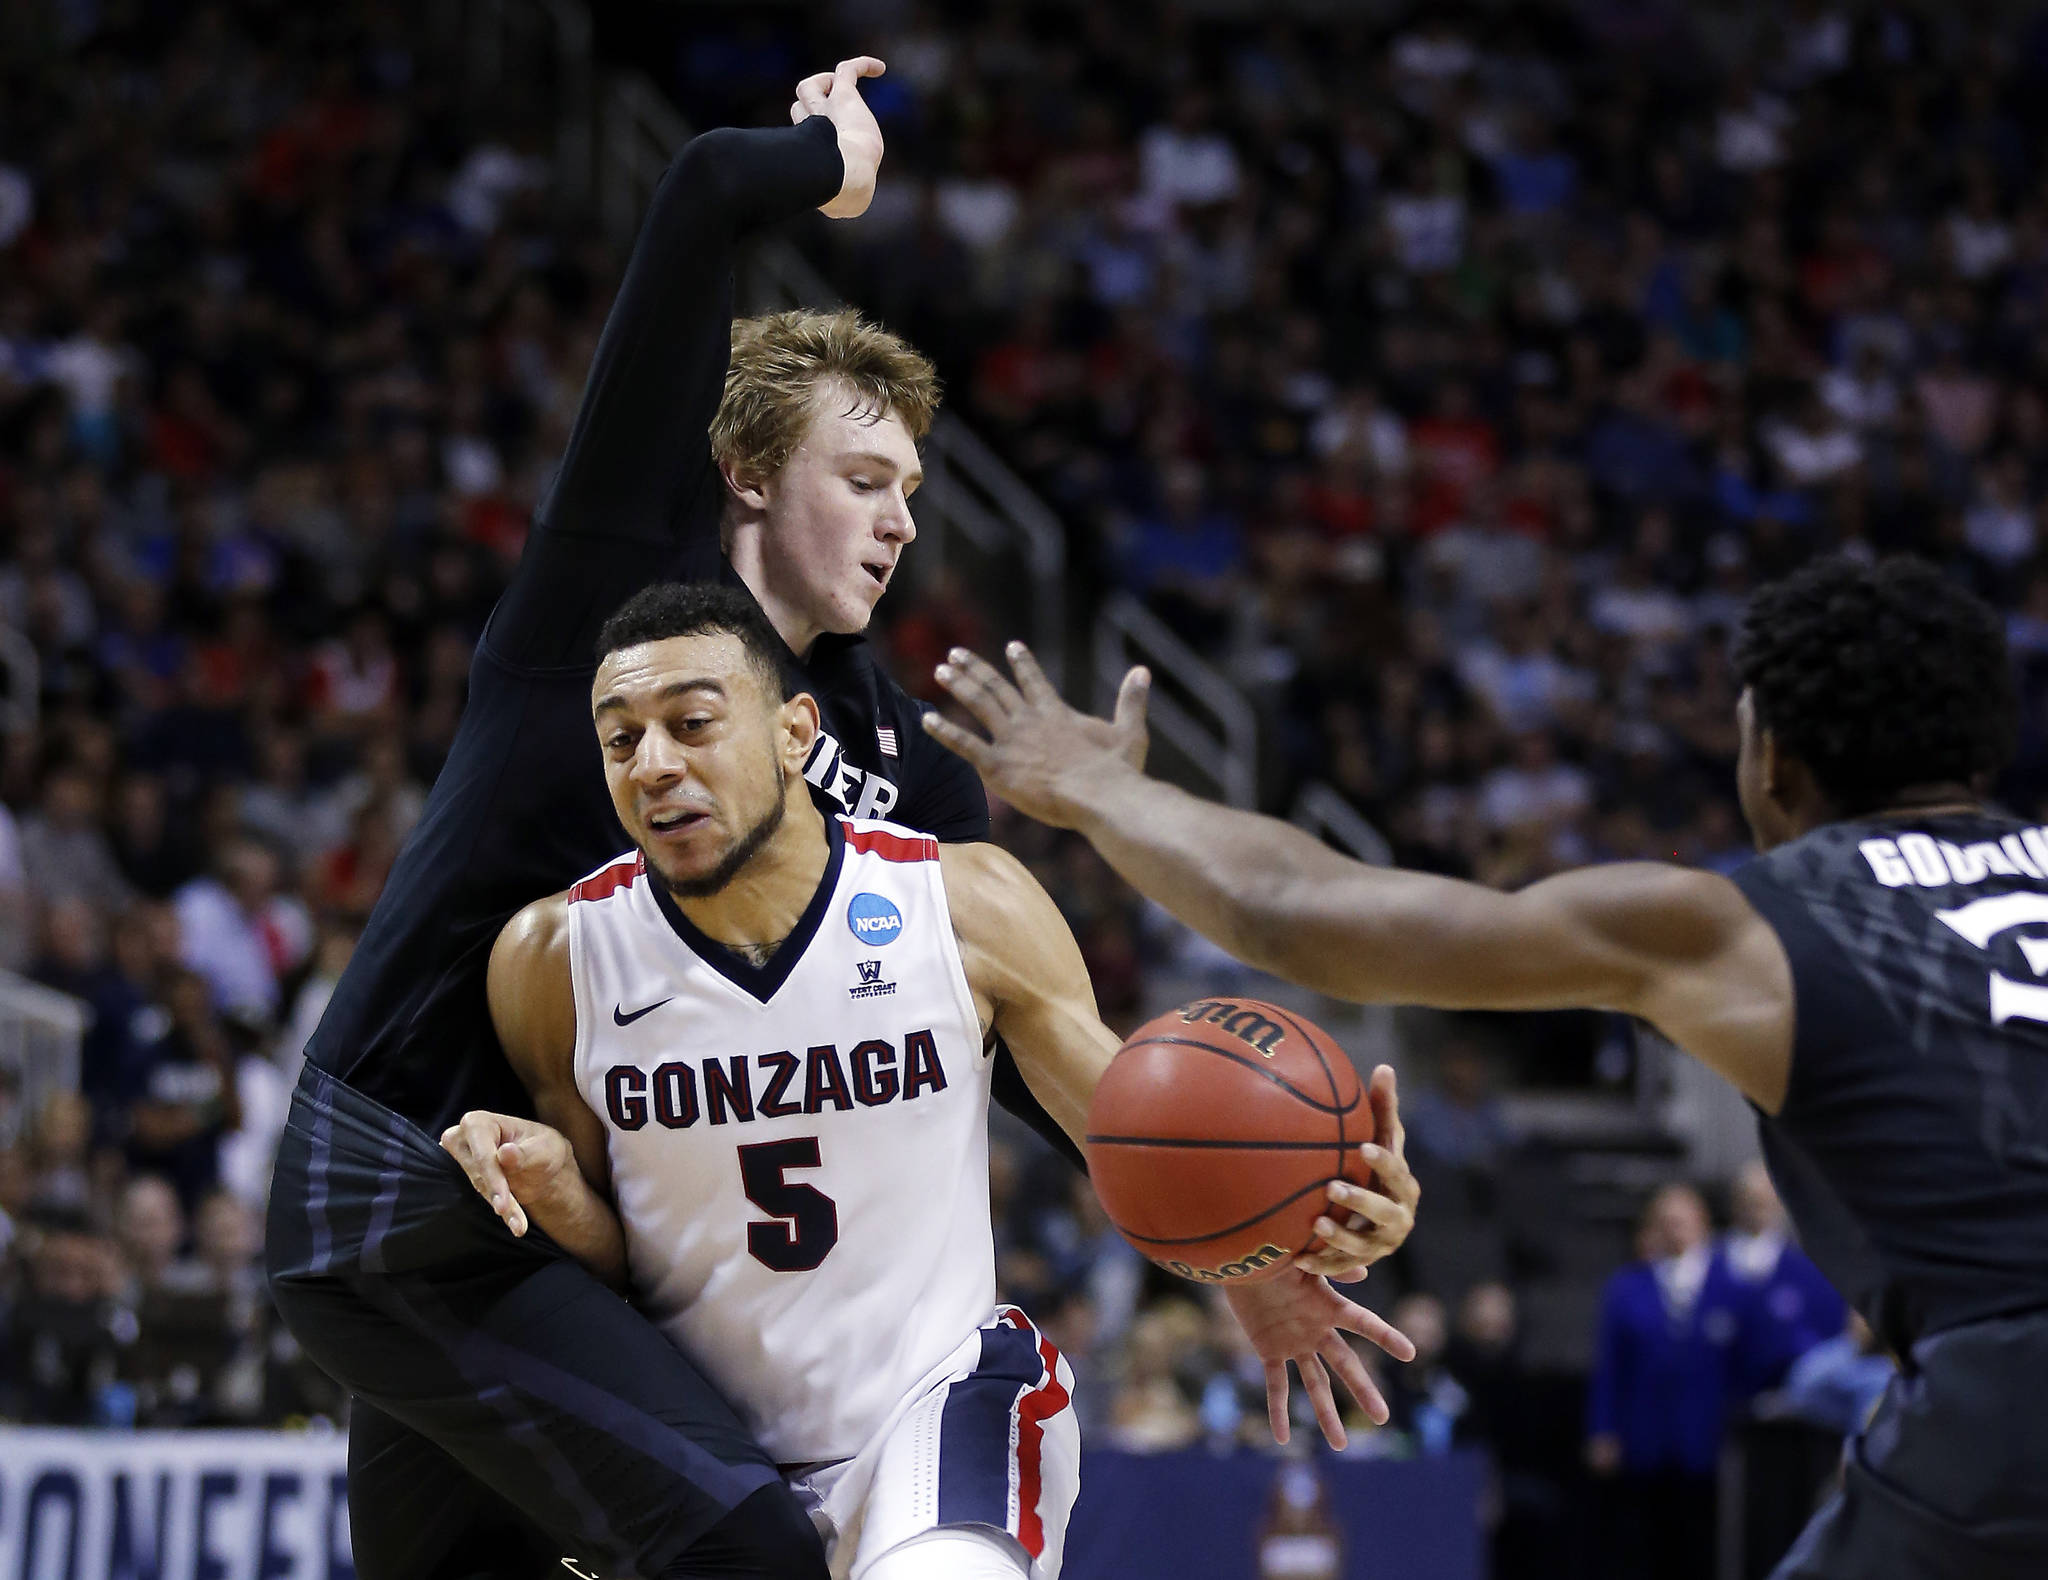 Gonzaga guard Nigel Williams-Goss (5) dribbles between Xavier guard J.P. Macura, left, and Quentin Goodin during the first half of an NCAA Tournament college basketball regional final game Saturday, March 25, 2017, in San Jose, Calif. (AP Photo/Tony Avelar)